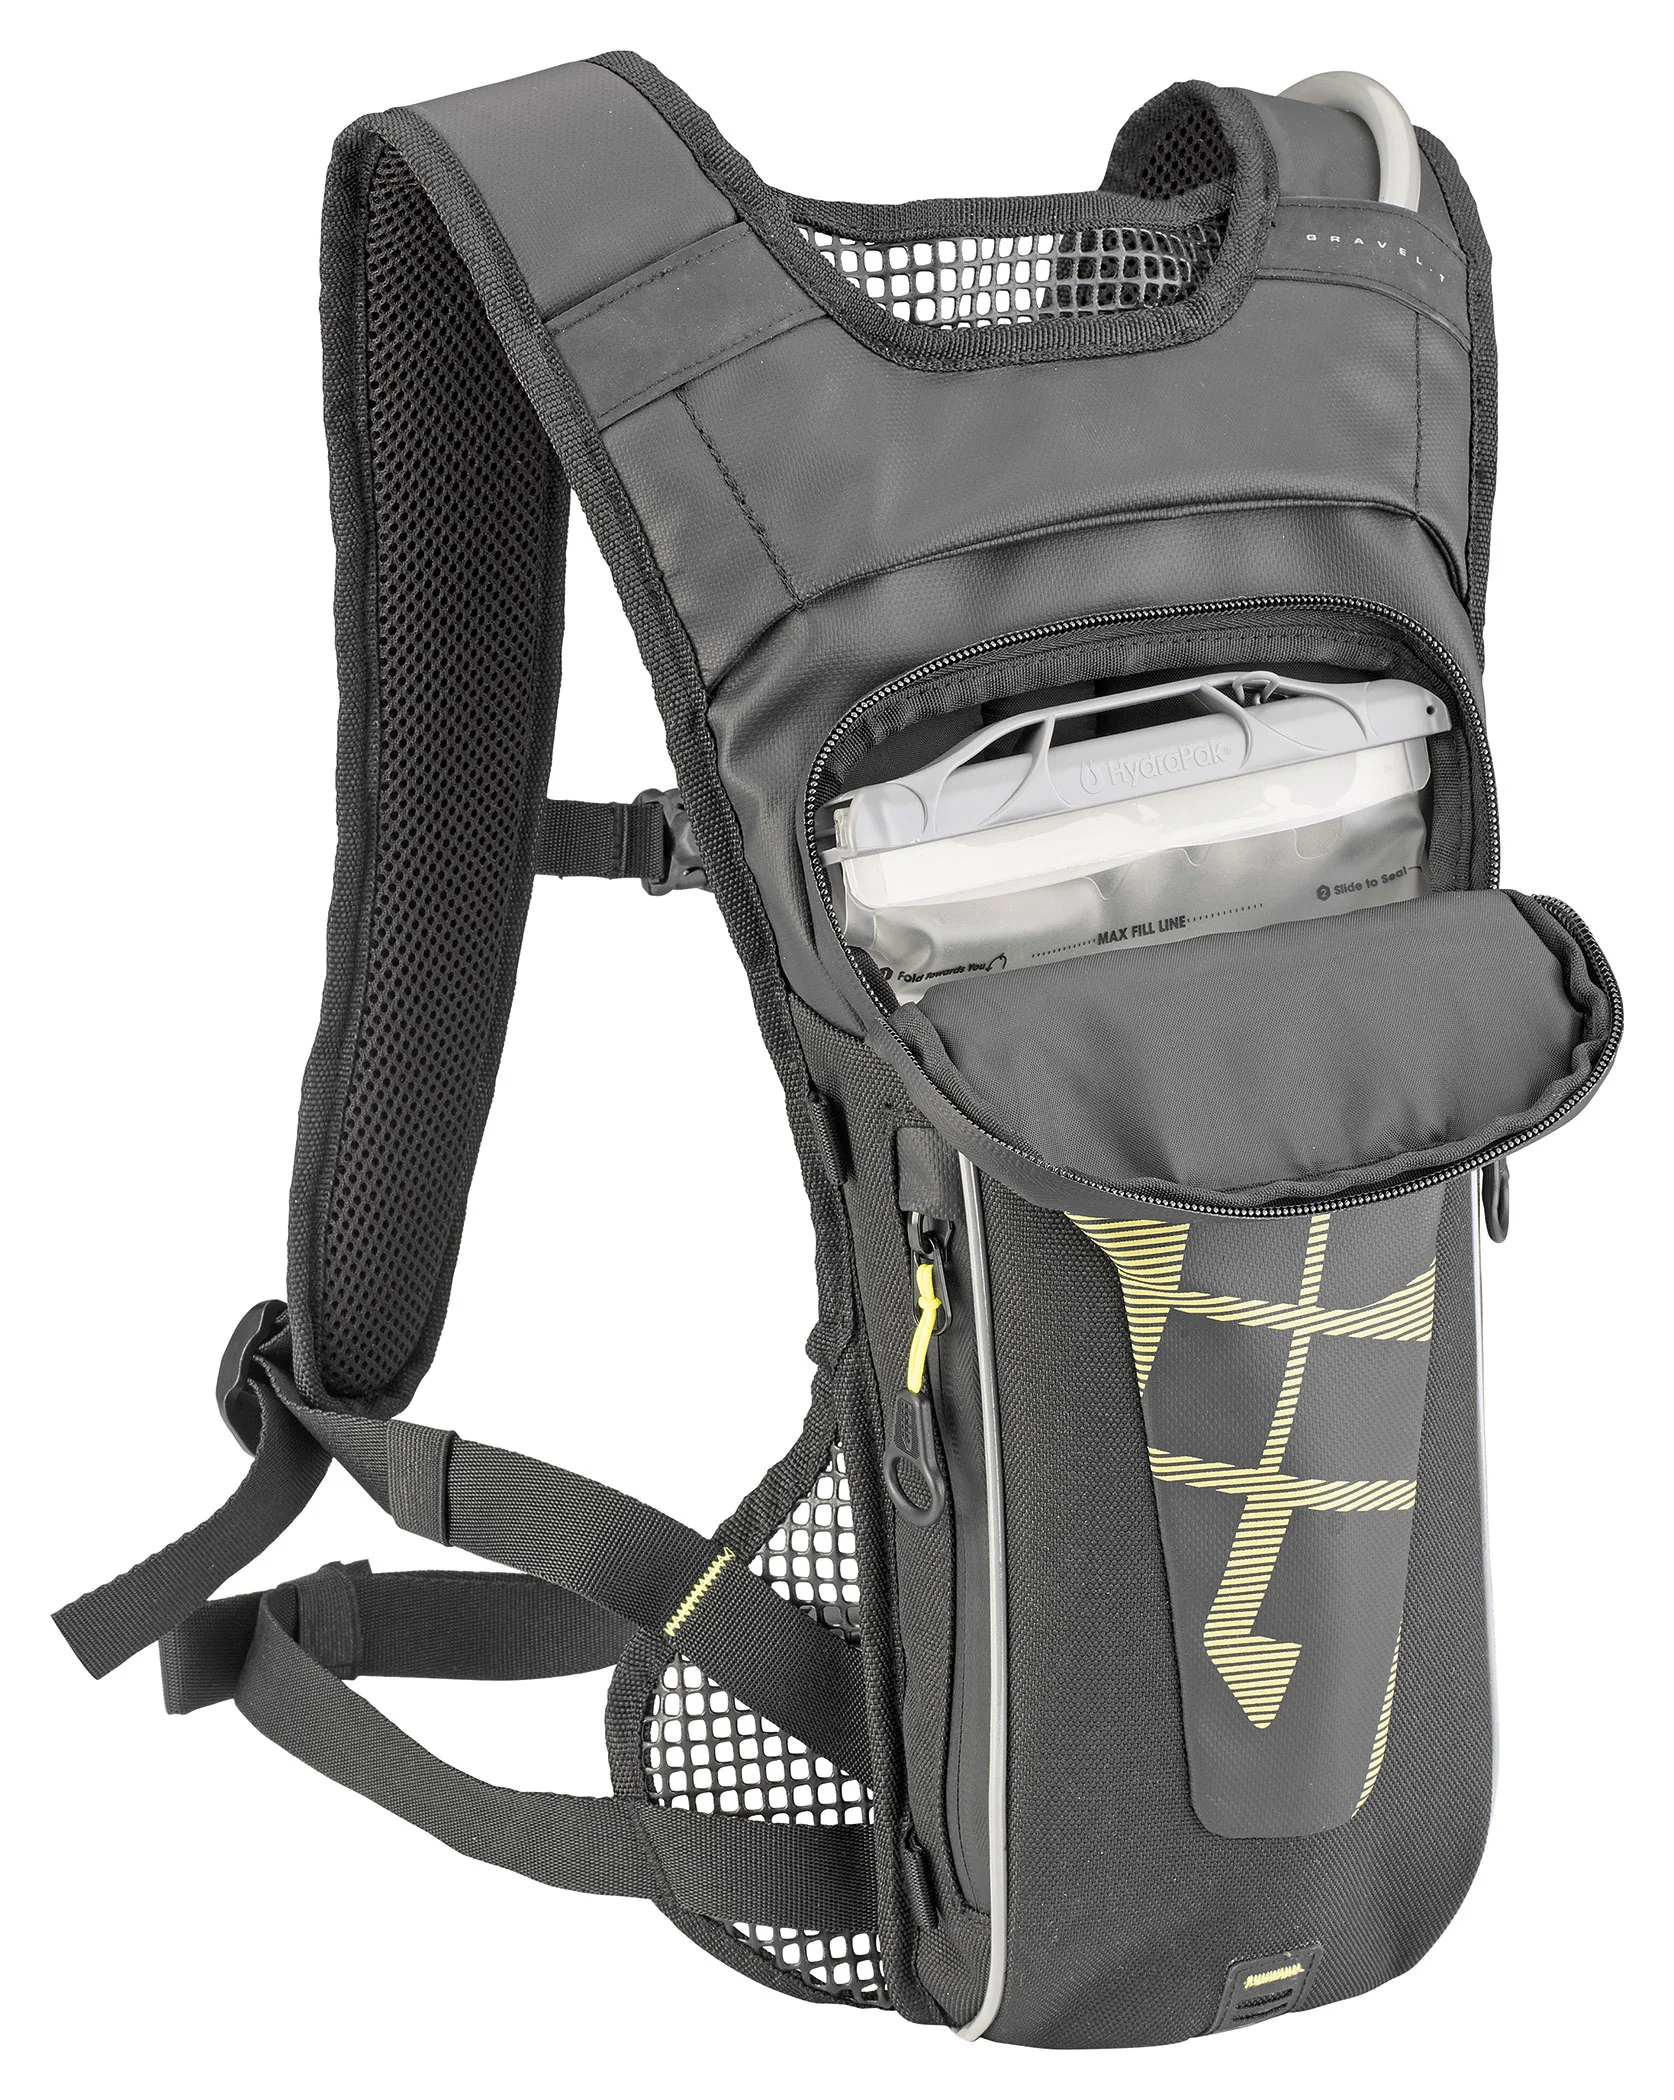 BACKPACK WITH WATERBAG